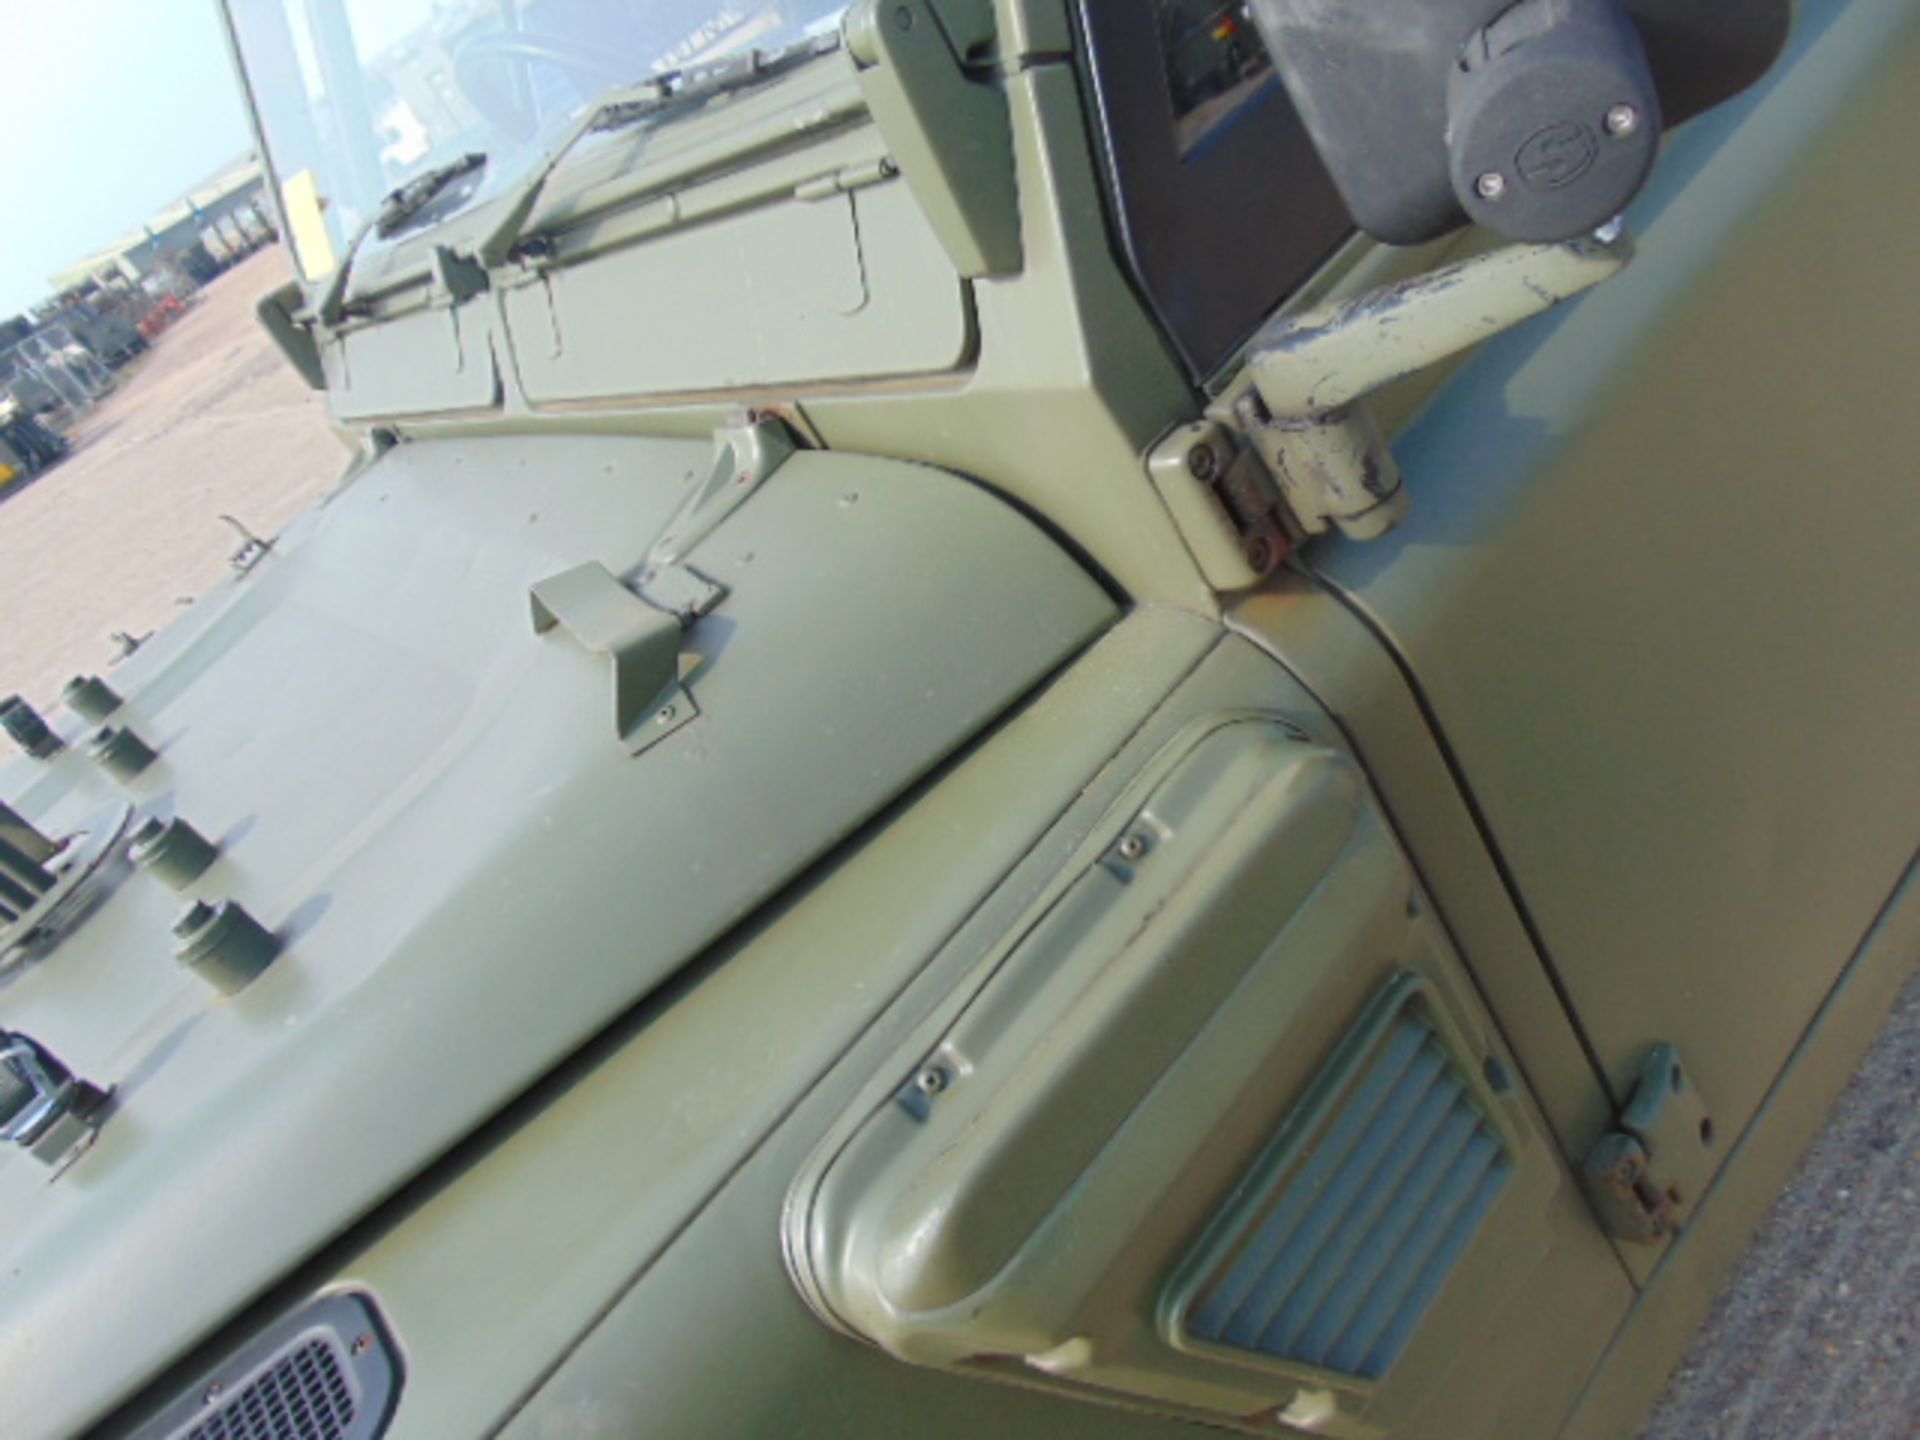 Military Specification Land Rover Wolf 90 Soft Top - Image 20 of 26